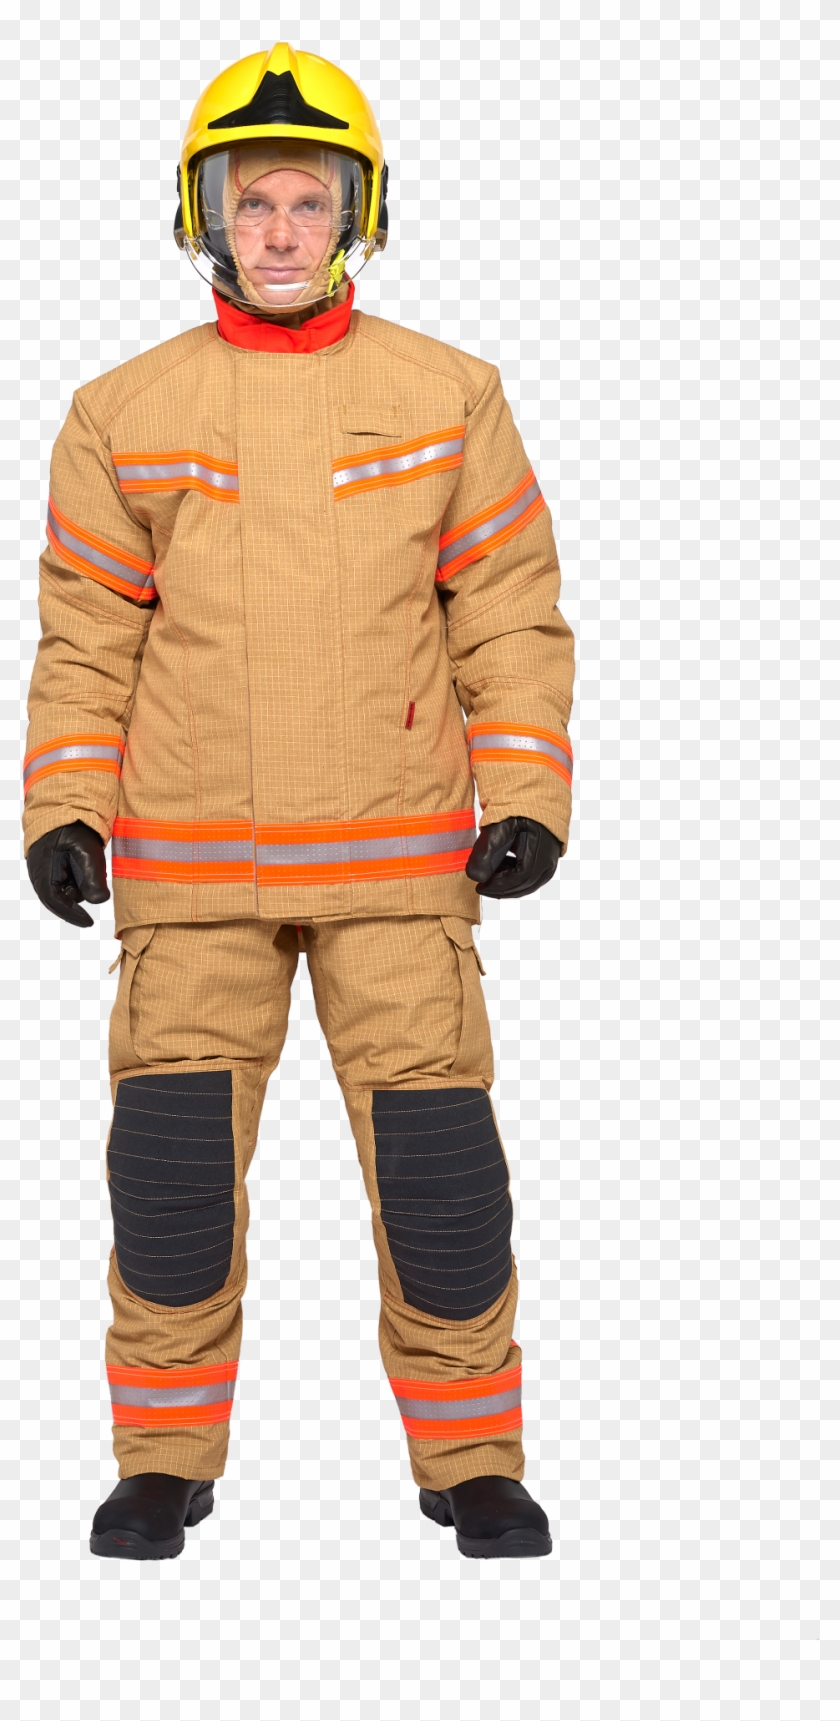 Bristol Uniforms Launches New Range Of Structural Firefighting - Firefighter #1105434